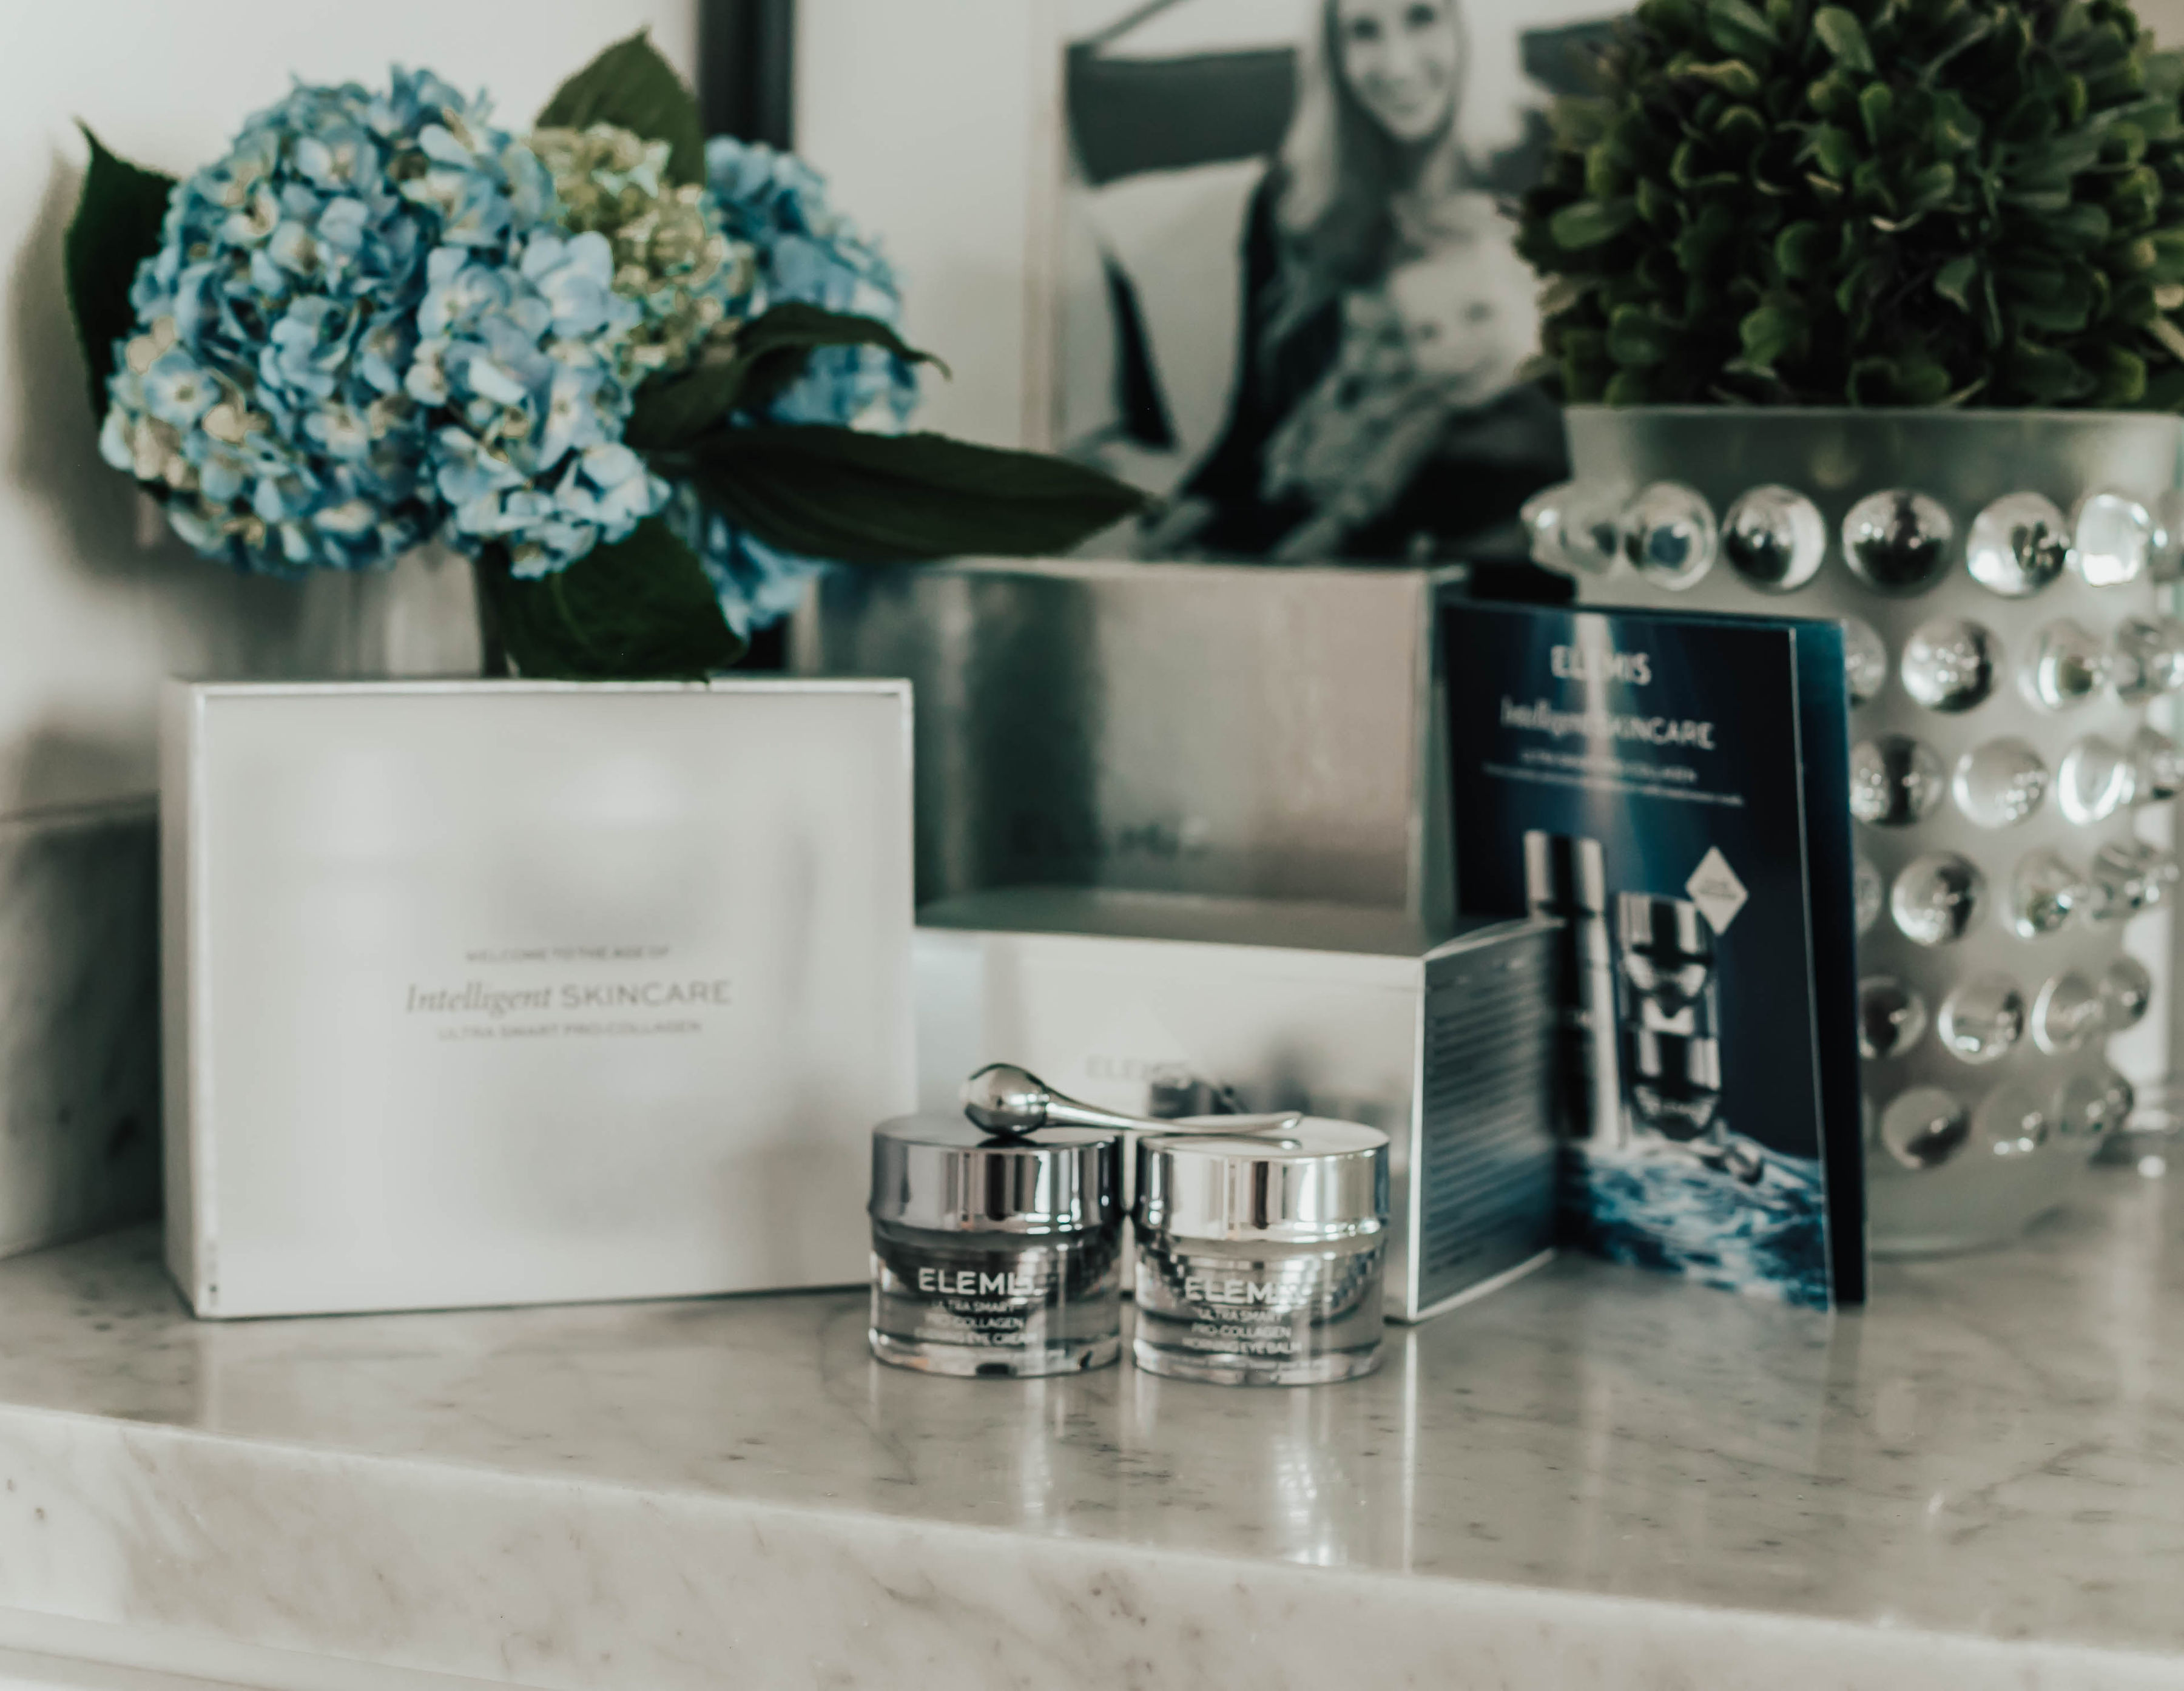 Two Peas in a Prada Bloggers, Emily Farren Wieczorek and Ashley Zeal of Two Peas in a Prada talk about the newest anti aging serum - The Elemis ULTRA SMART Pro-Collagen Complex 12 Serum